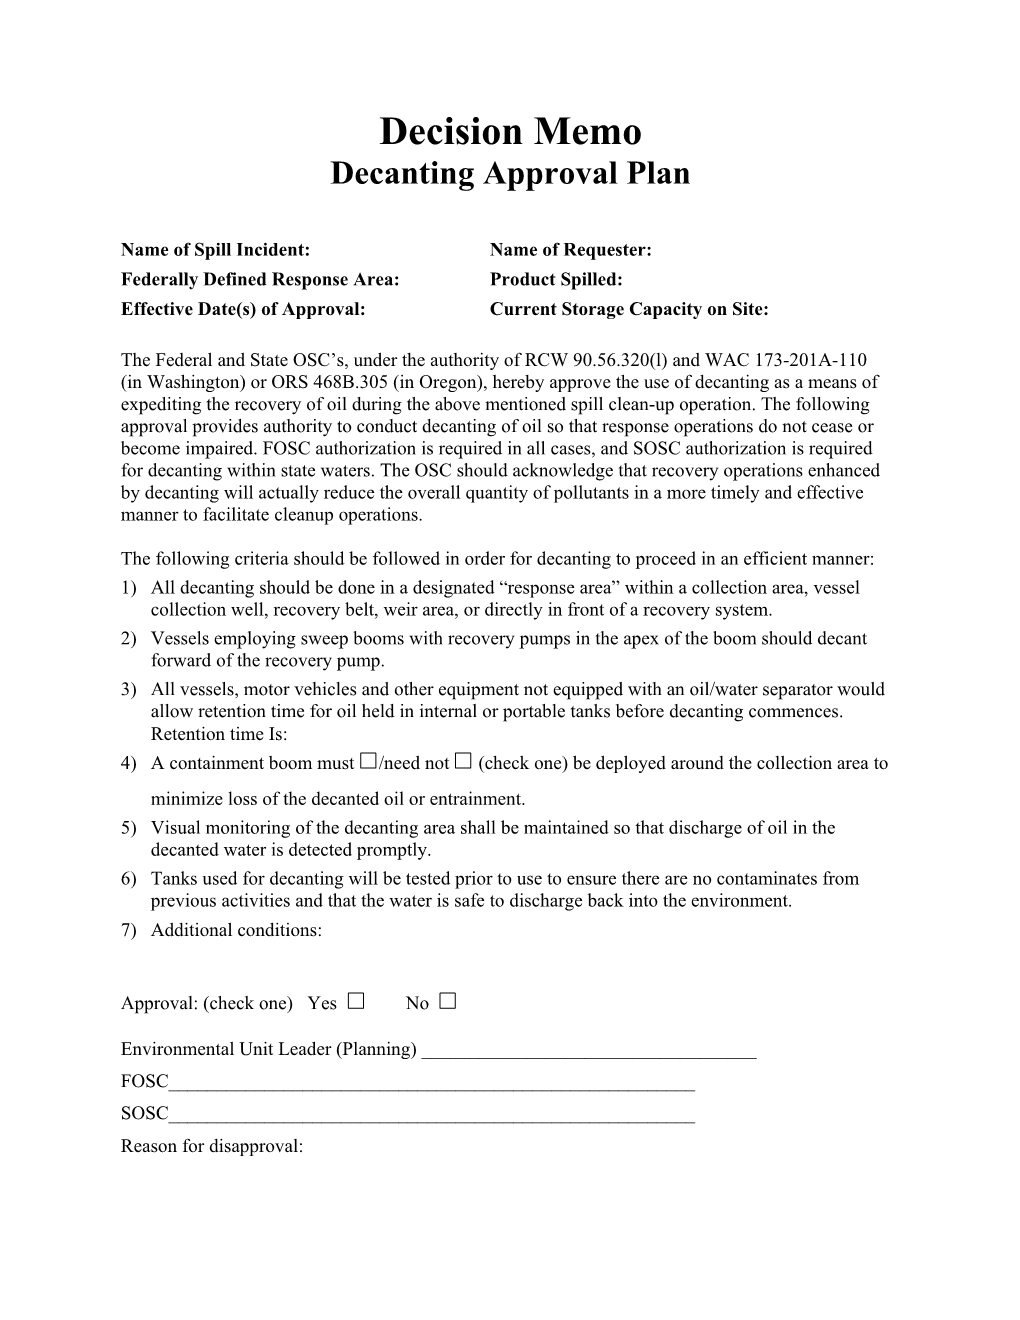 Decision Memo Decanting Approval Plan